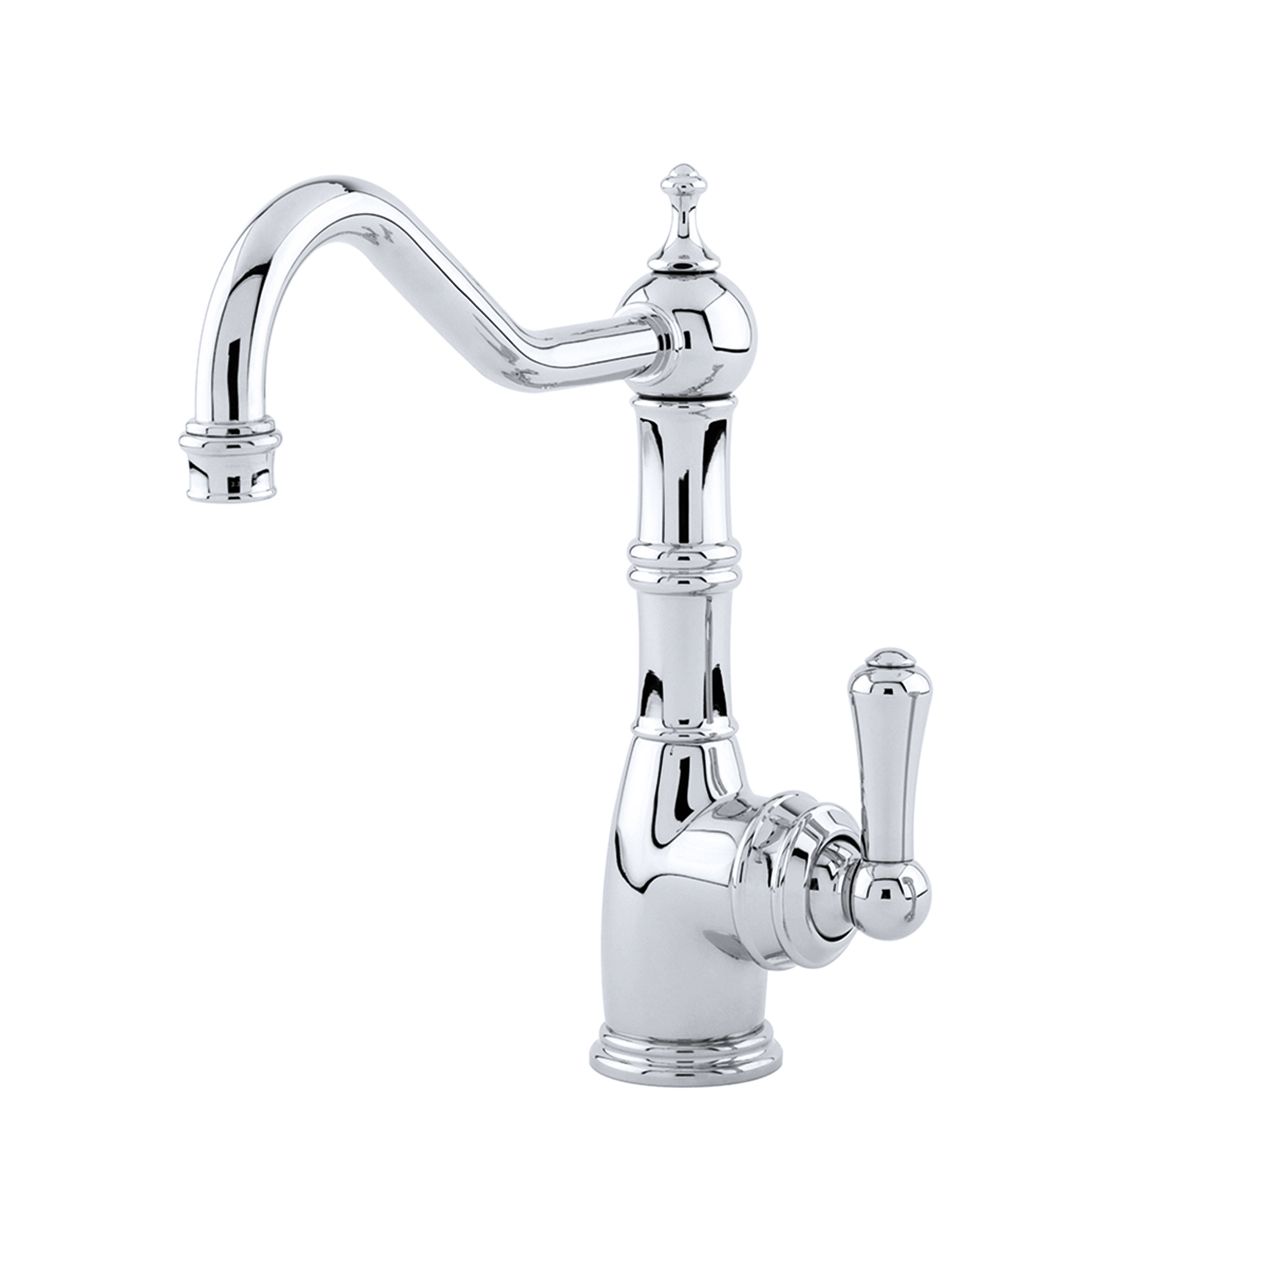 Aquitaine Sink Mixer with Single Lever Tap – Polished Chrome